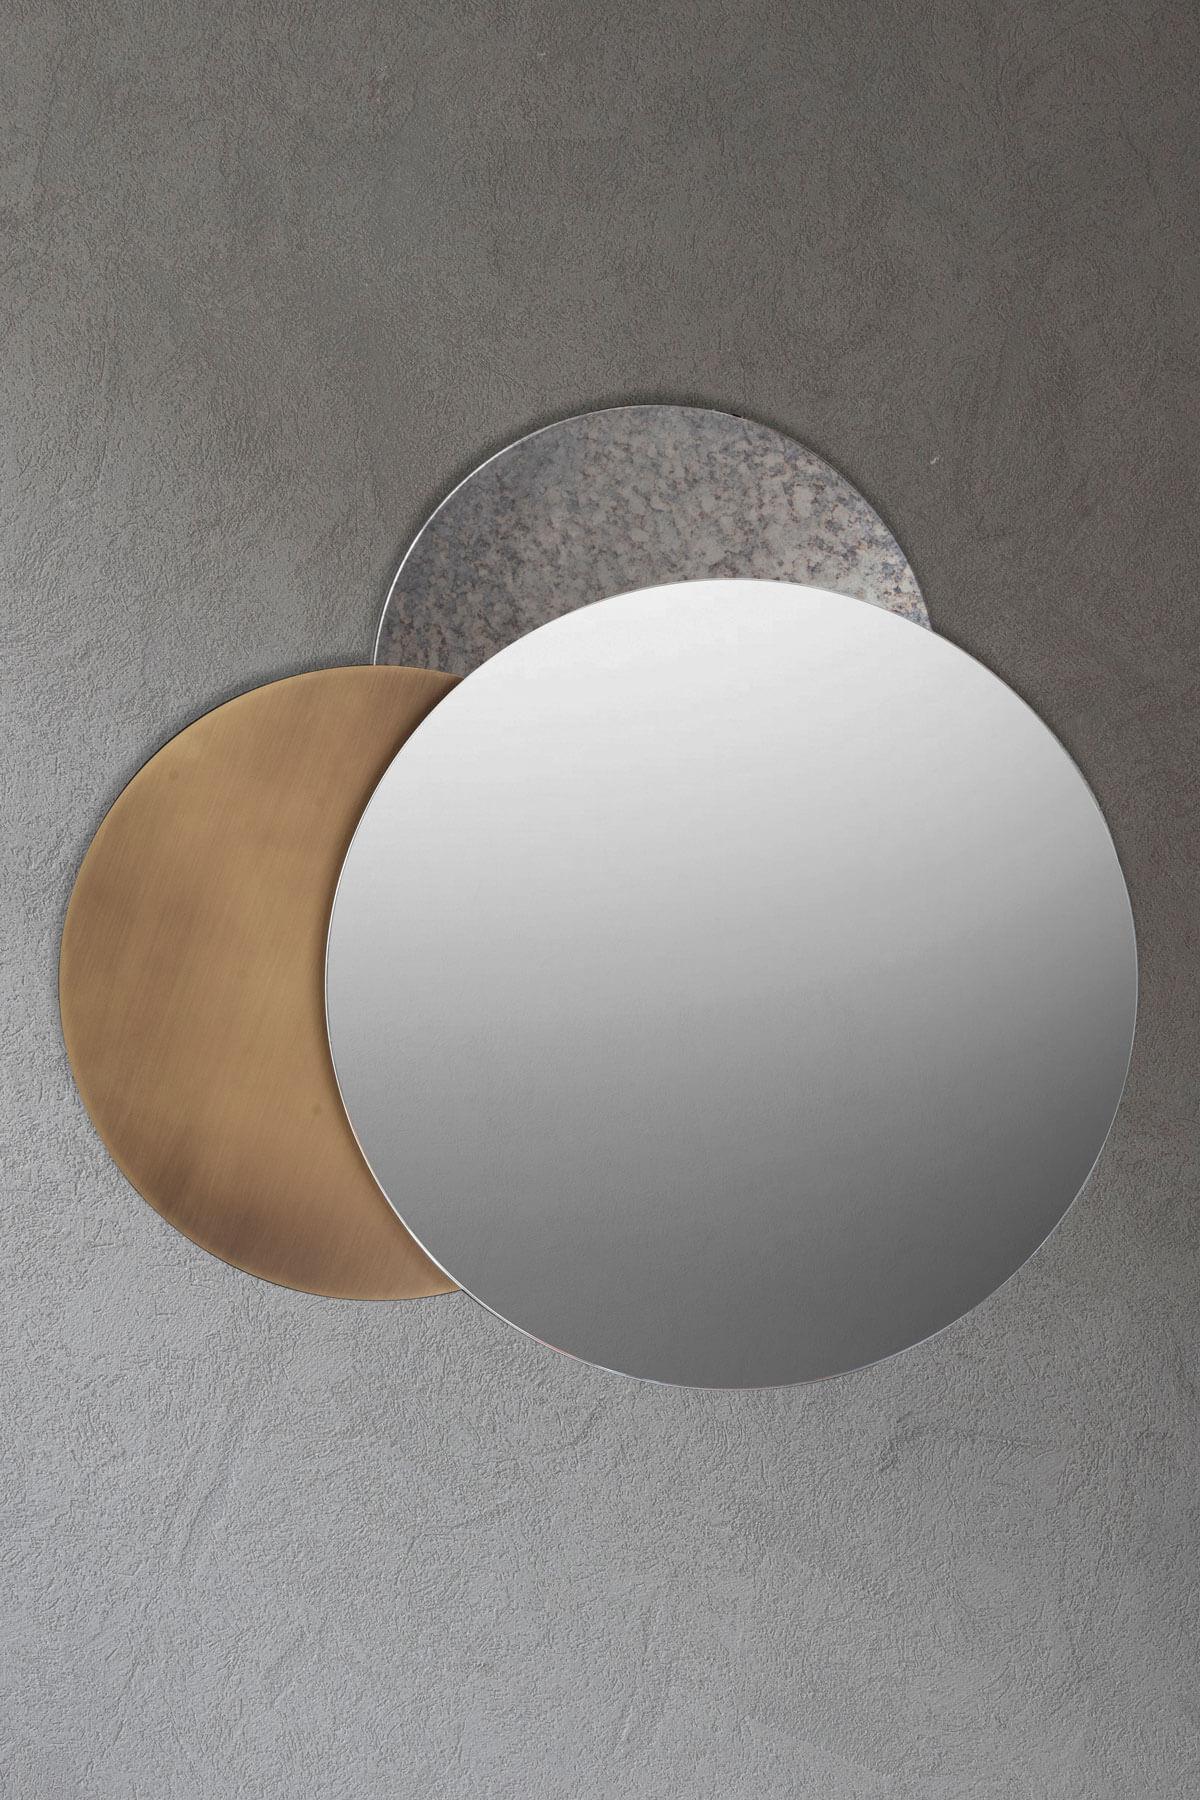 SOLARE MIRROR is a unique design example that flawlessly showcases the effect created by the coming together of circular forms. This magnificent mirror combines the allure of the material with aesthetics and functionality, adding a new dimension to